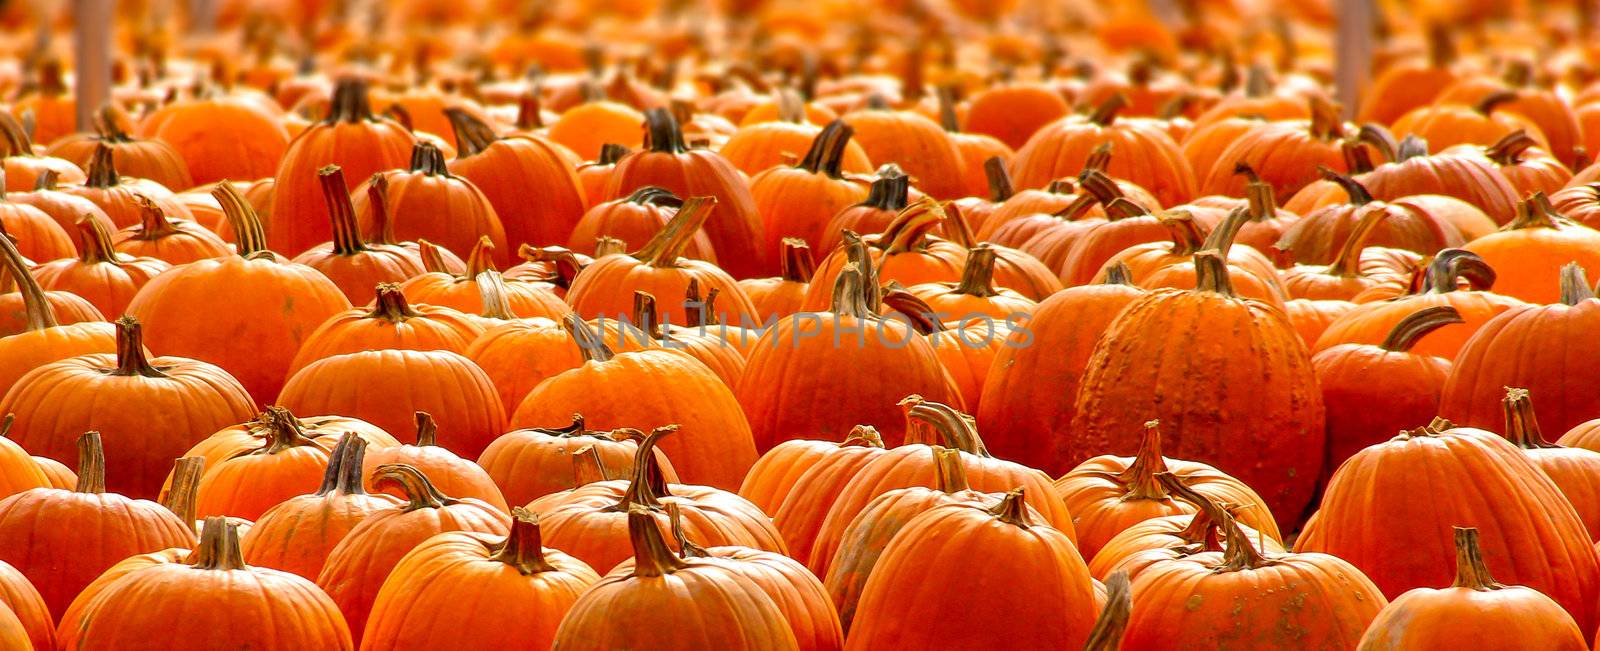 Rows of Halloween Pumpkins by wolterk